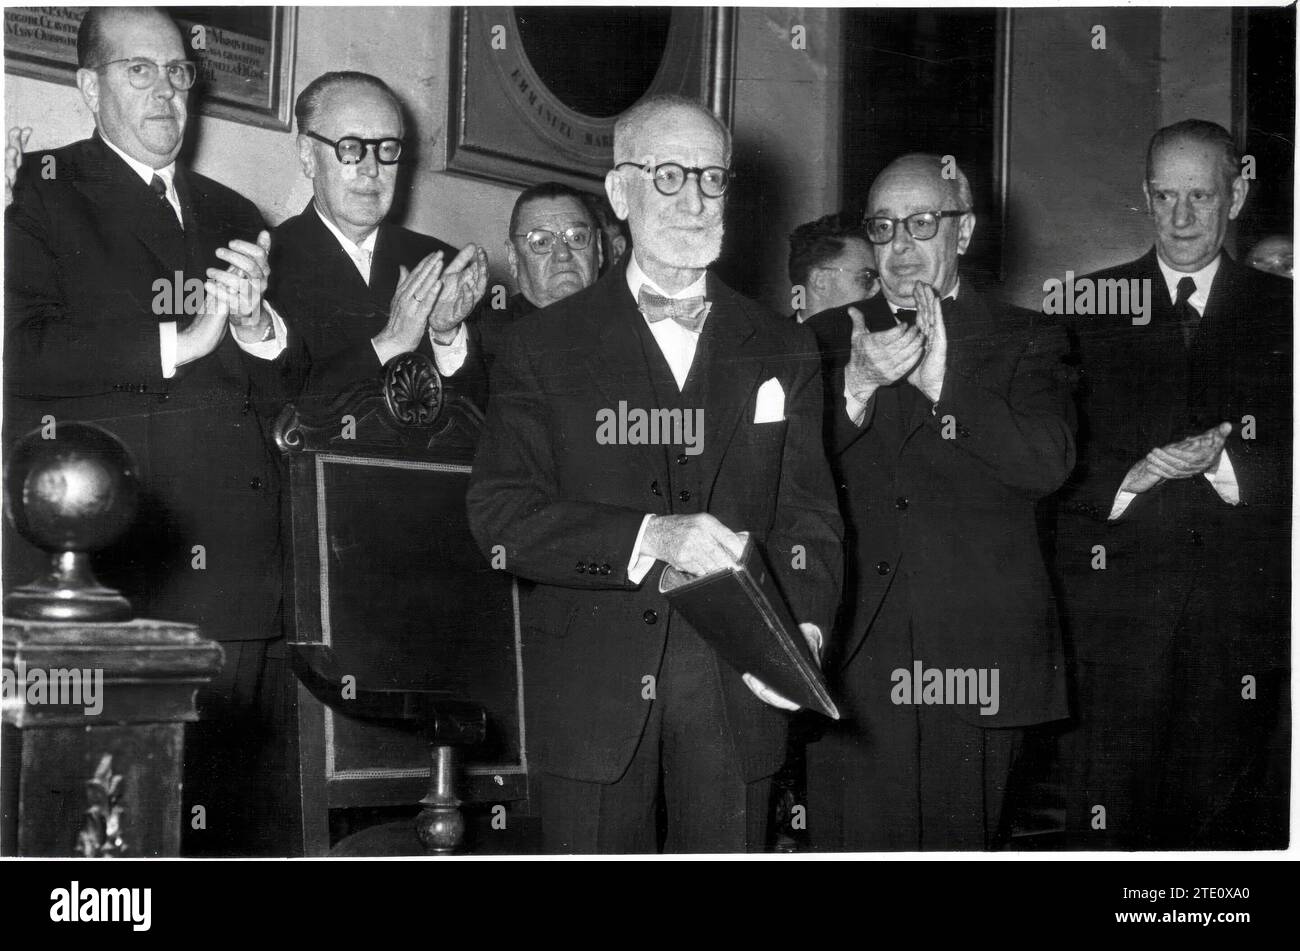 TRIBUTE TO DR. CORTÉS, IN SEVILLE. December 1957 - During the event that celebrated the 25th anniversary of the founding of the Provincial Medical Society of Seville, its first president, Dr. Antonio Cortés Lladó, was the object of a heartfelt tribute . In the photograph the Illustrious Honored Honoree appears receiving applause from some of his colleagues, among whom can be seen, in the background, Dr. Jiménez Díaz. Photo Serrano. Credit: Album / Archivo ABC / Serrano Stock Photo